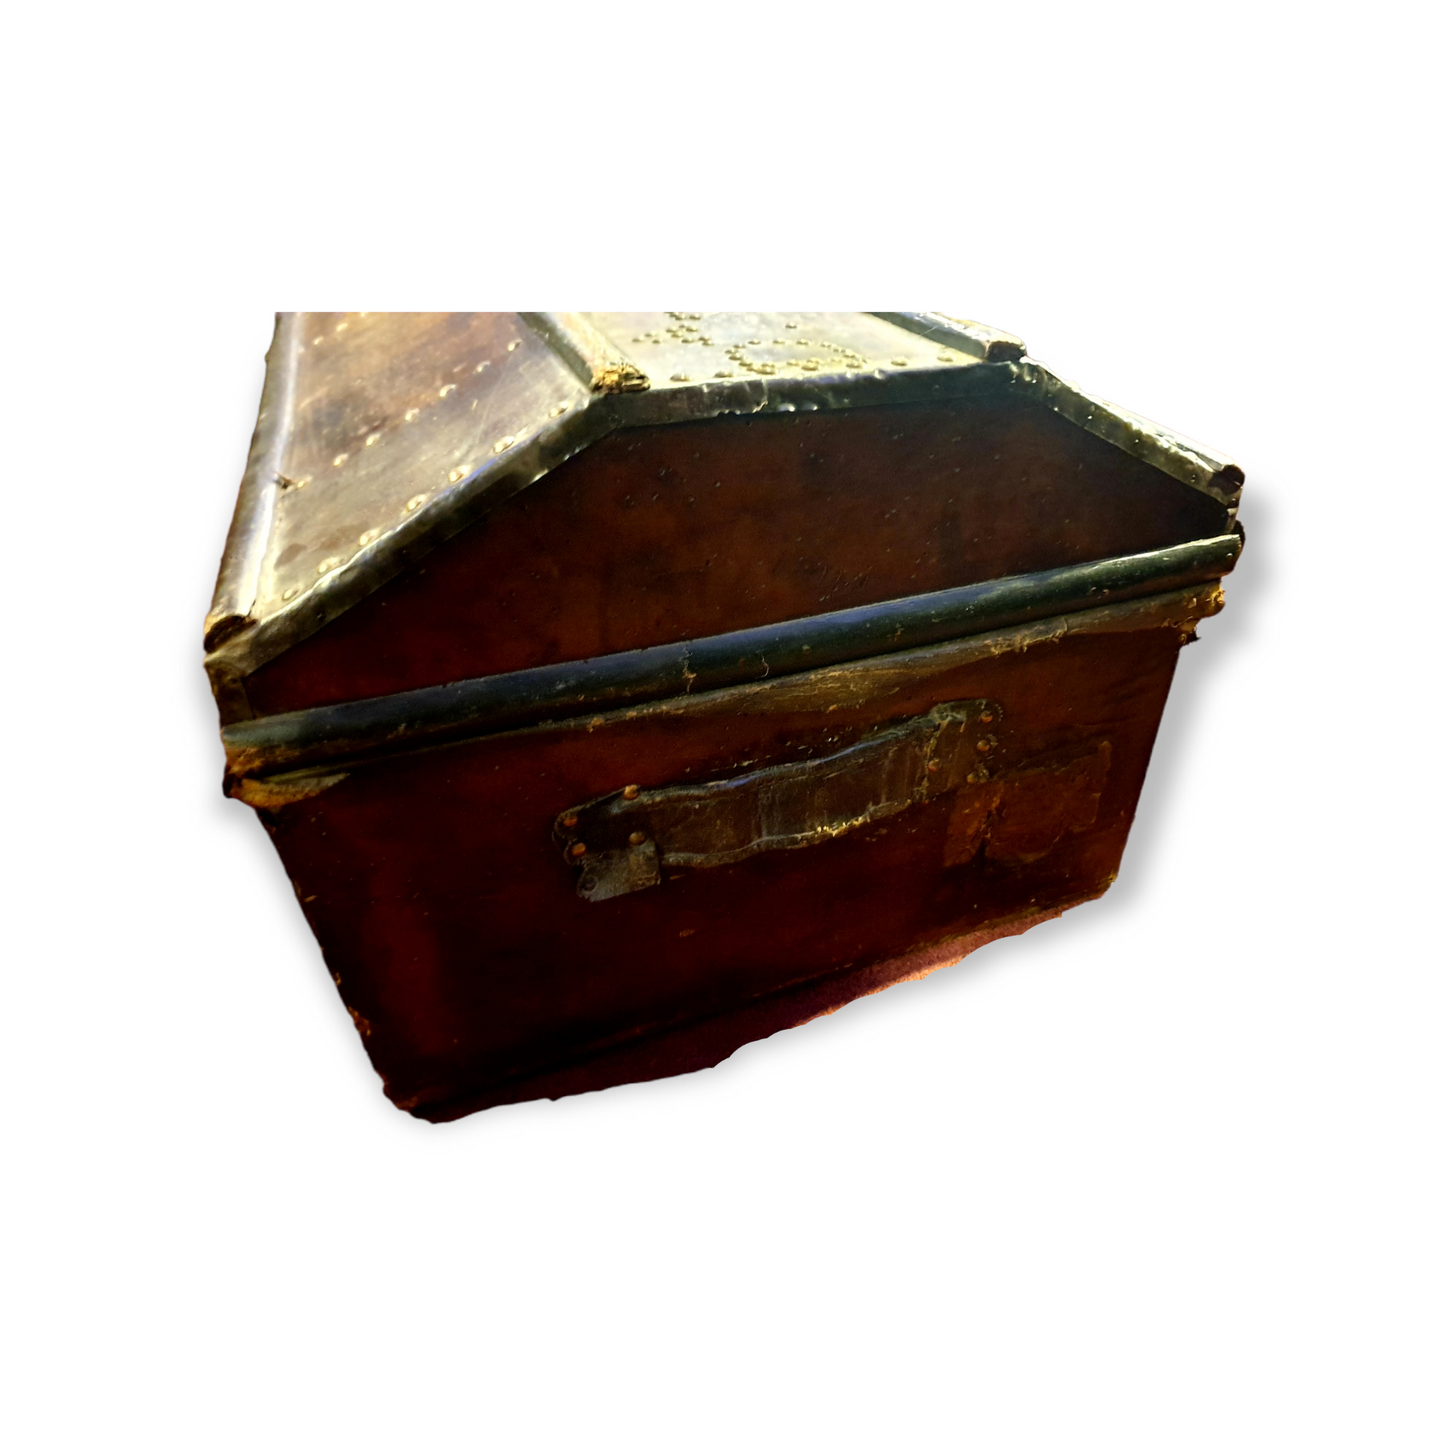 17th Century Spanish Antique Leather-Bound Travelling Trunk or Chest